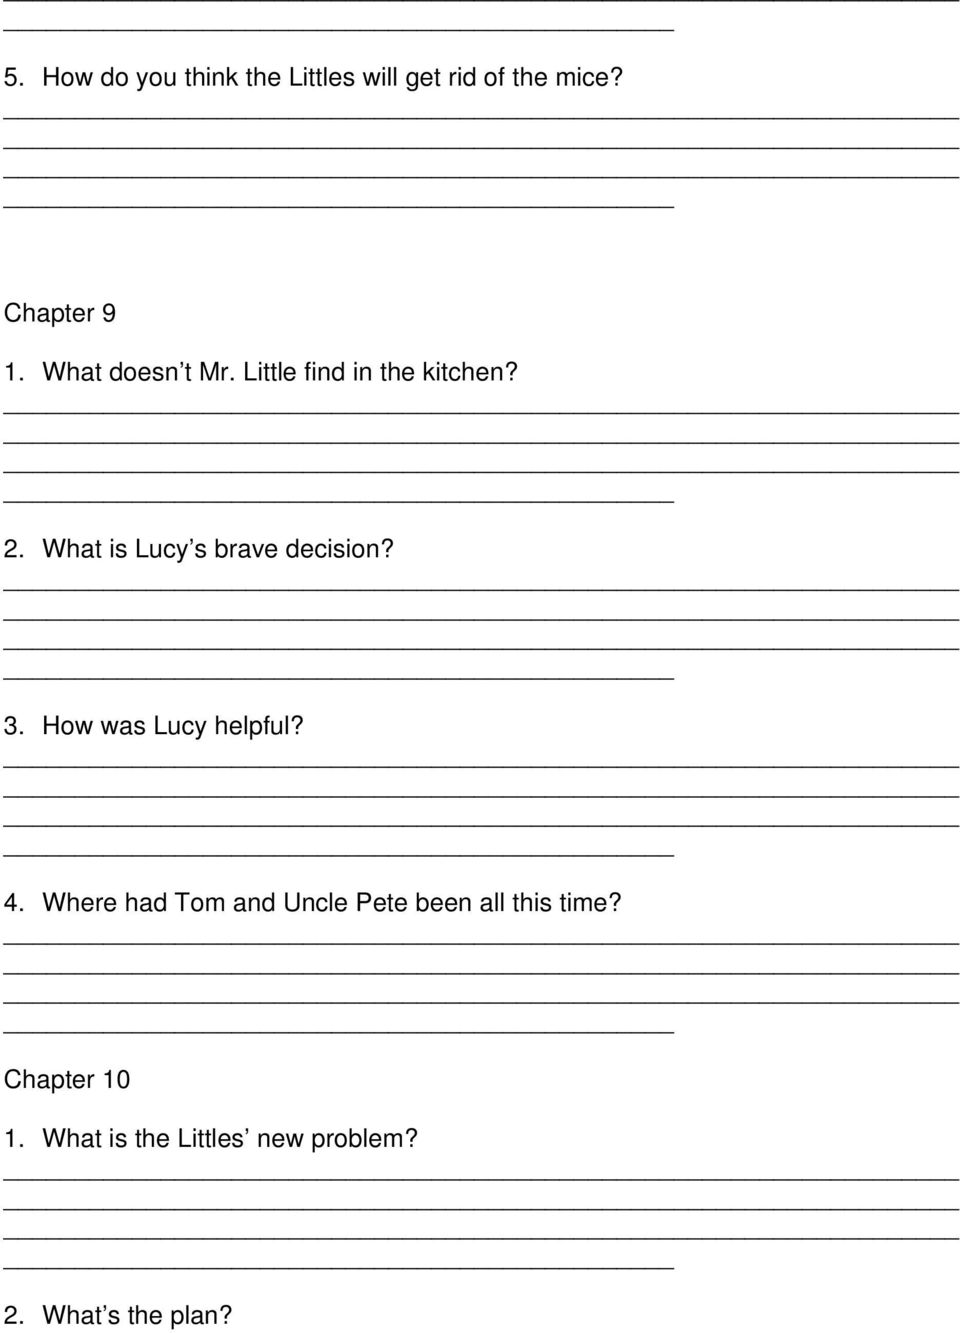 The Littles By John Peterson Comprehension Packet Includes Activities Such As Comprehension Questions Vocabulary Making Predictions Drawing Pdf Free Download